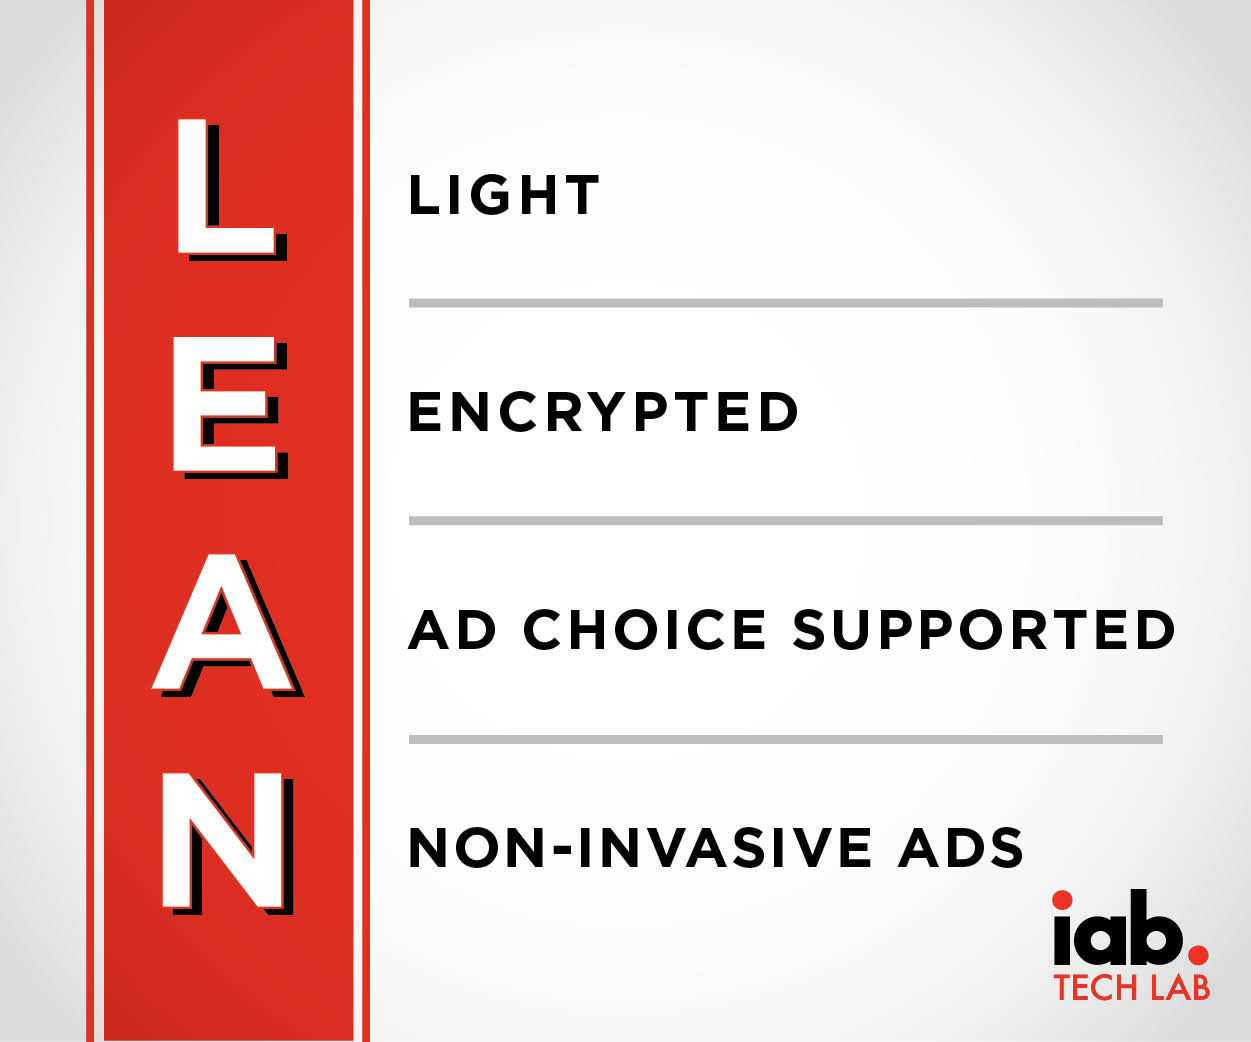 LEAN is the Interactive Advertising Bureau's new standard for online ads that it believes are less obnoxious.